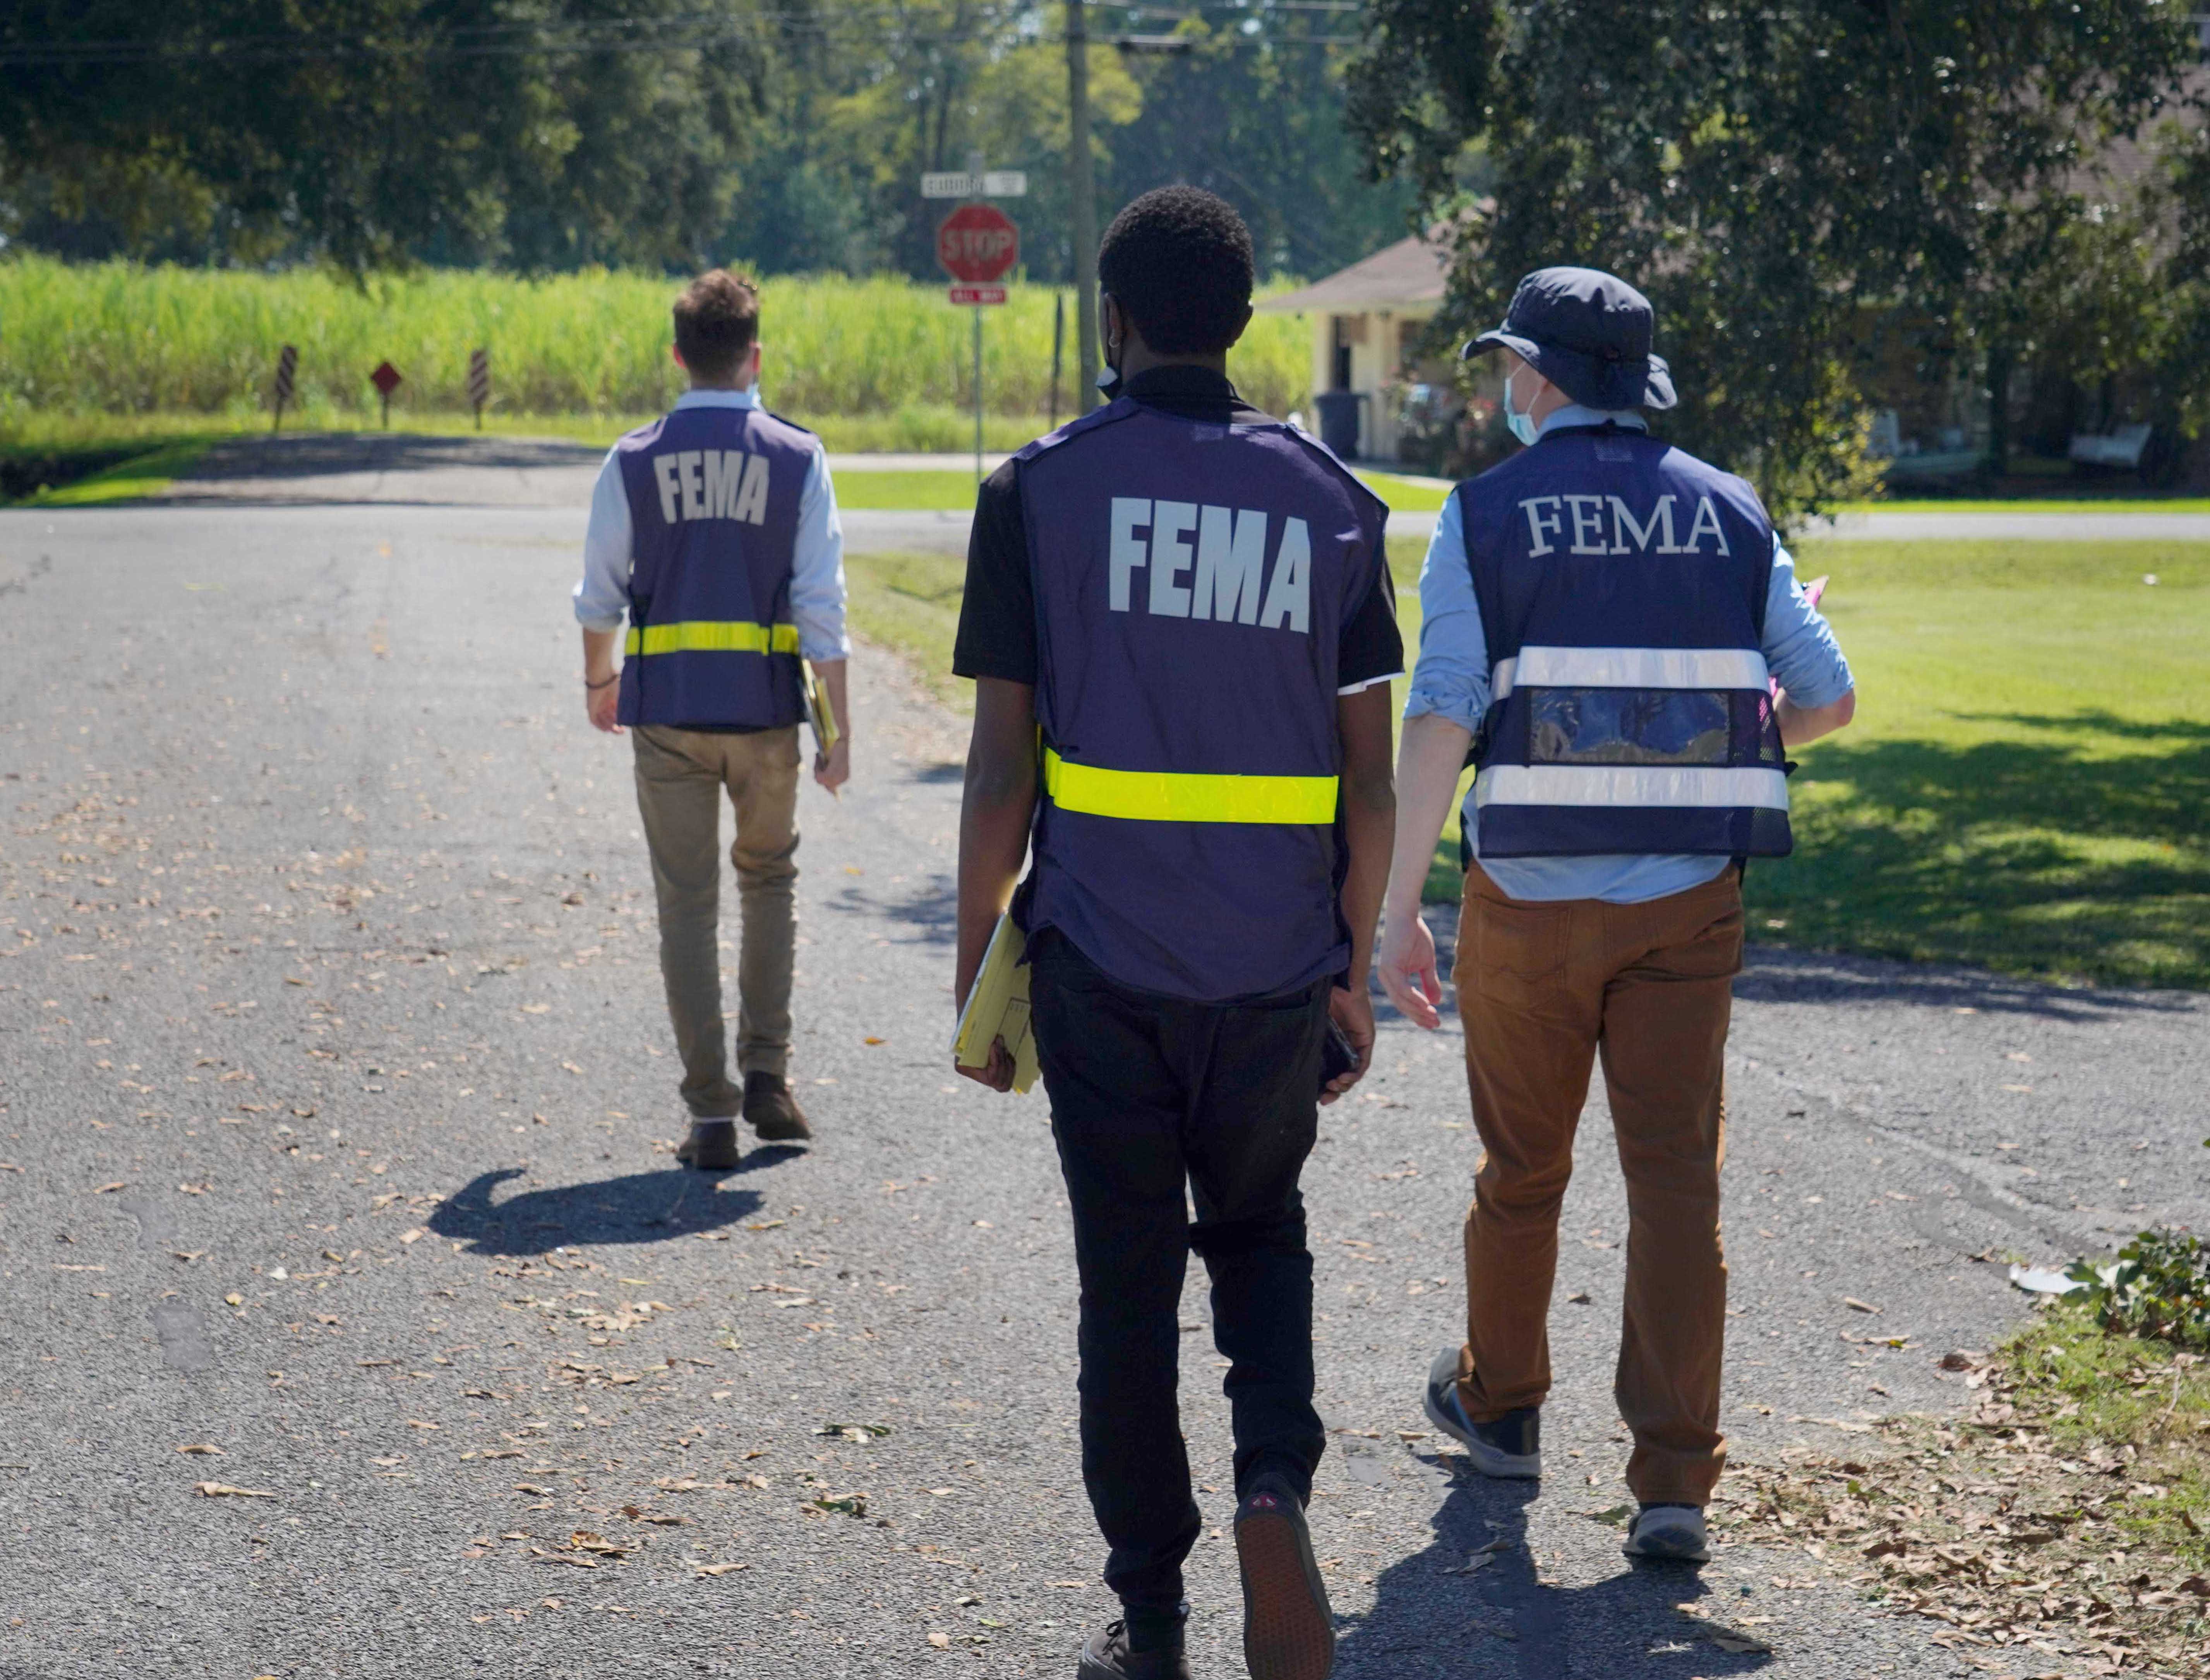 Three people in FEMA vests walk together away from the camera